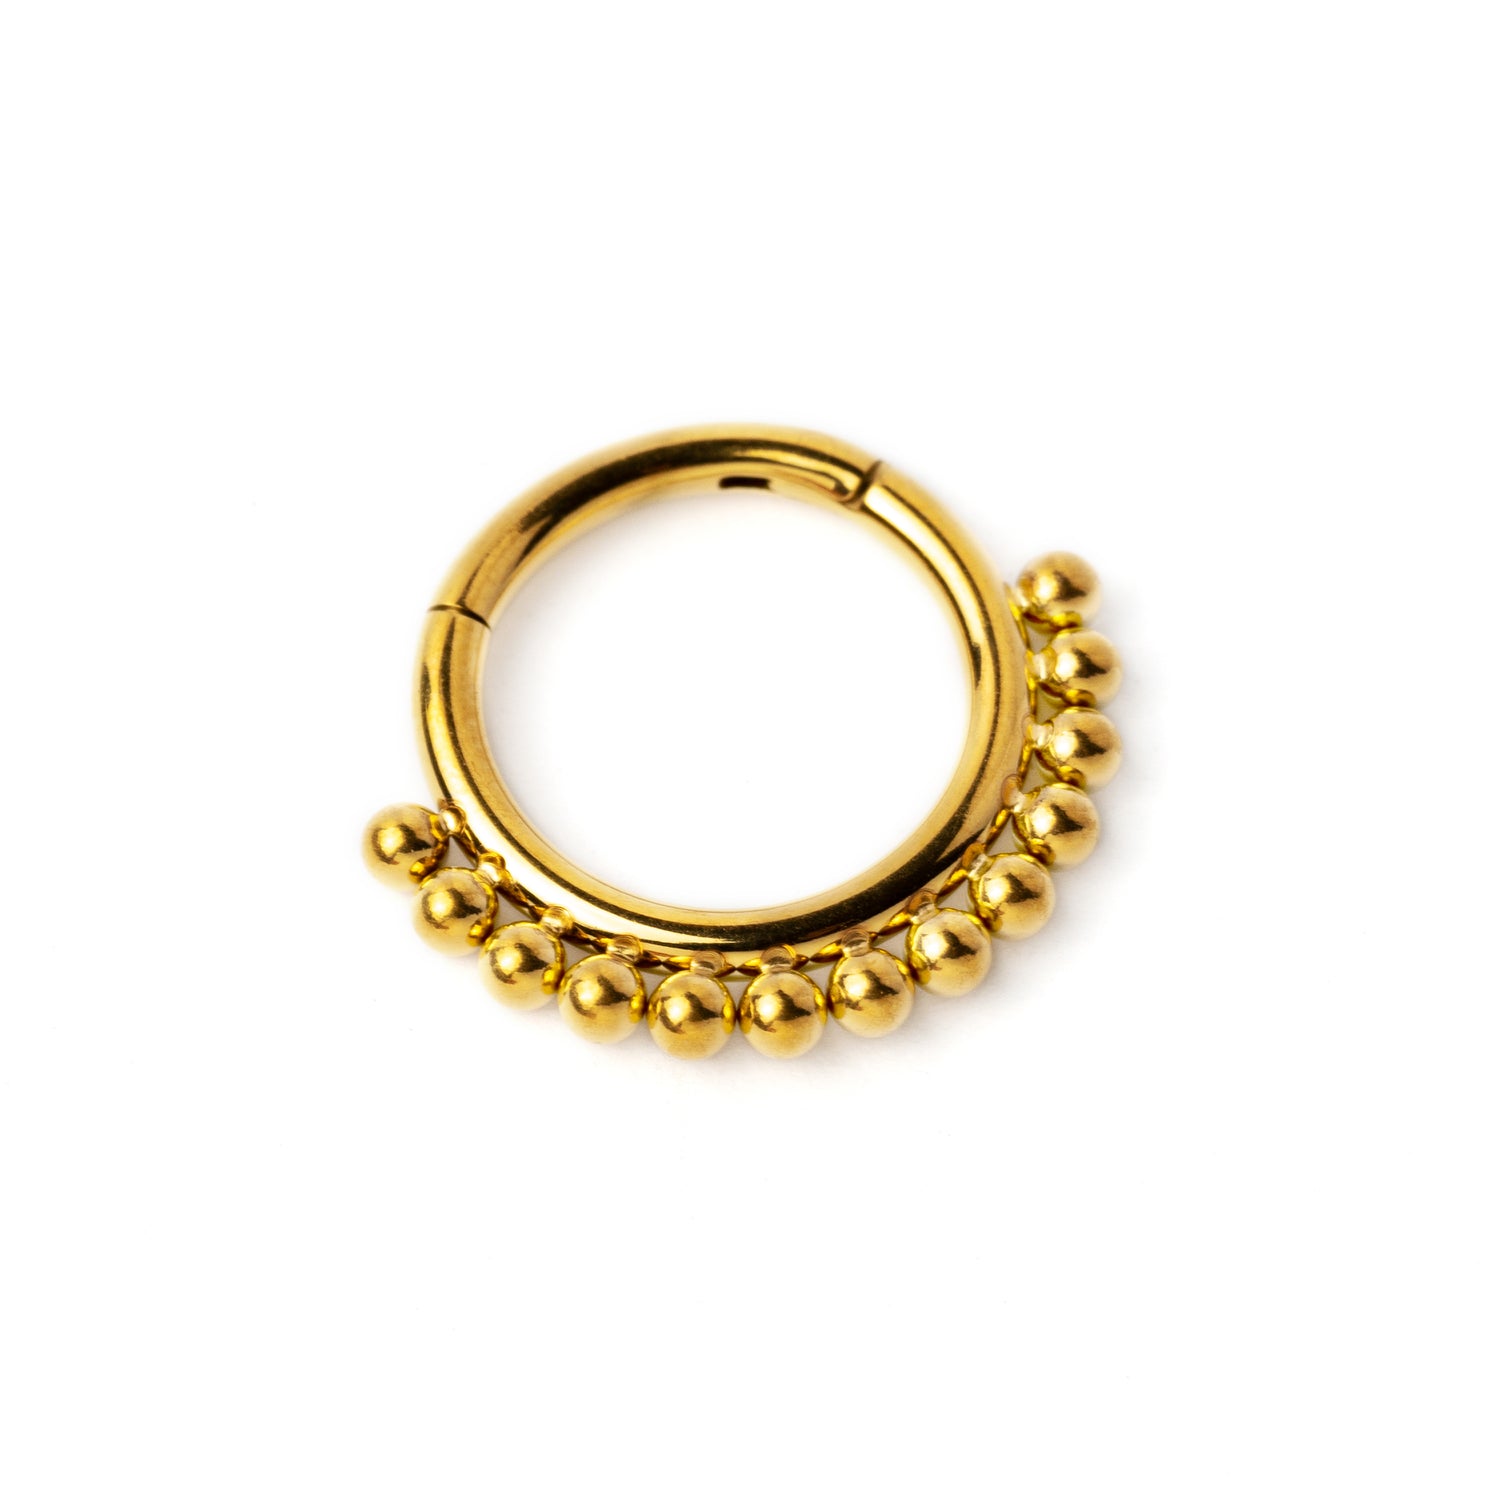 Liya Gold surgical steel septum clicker ring left side view